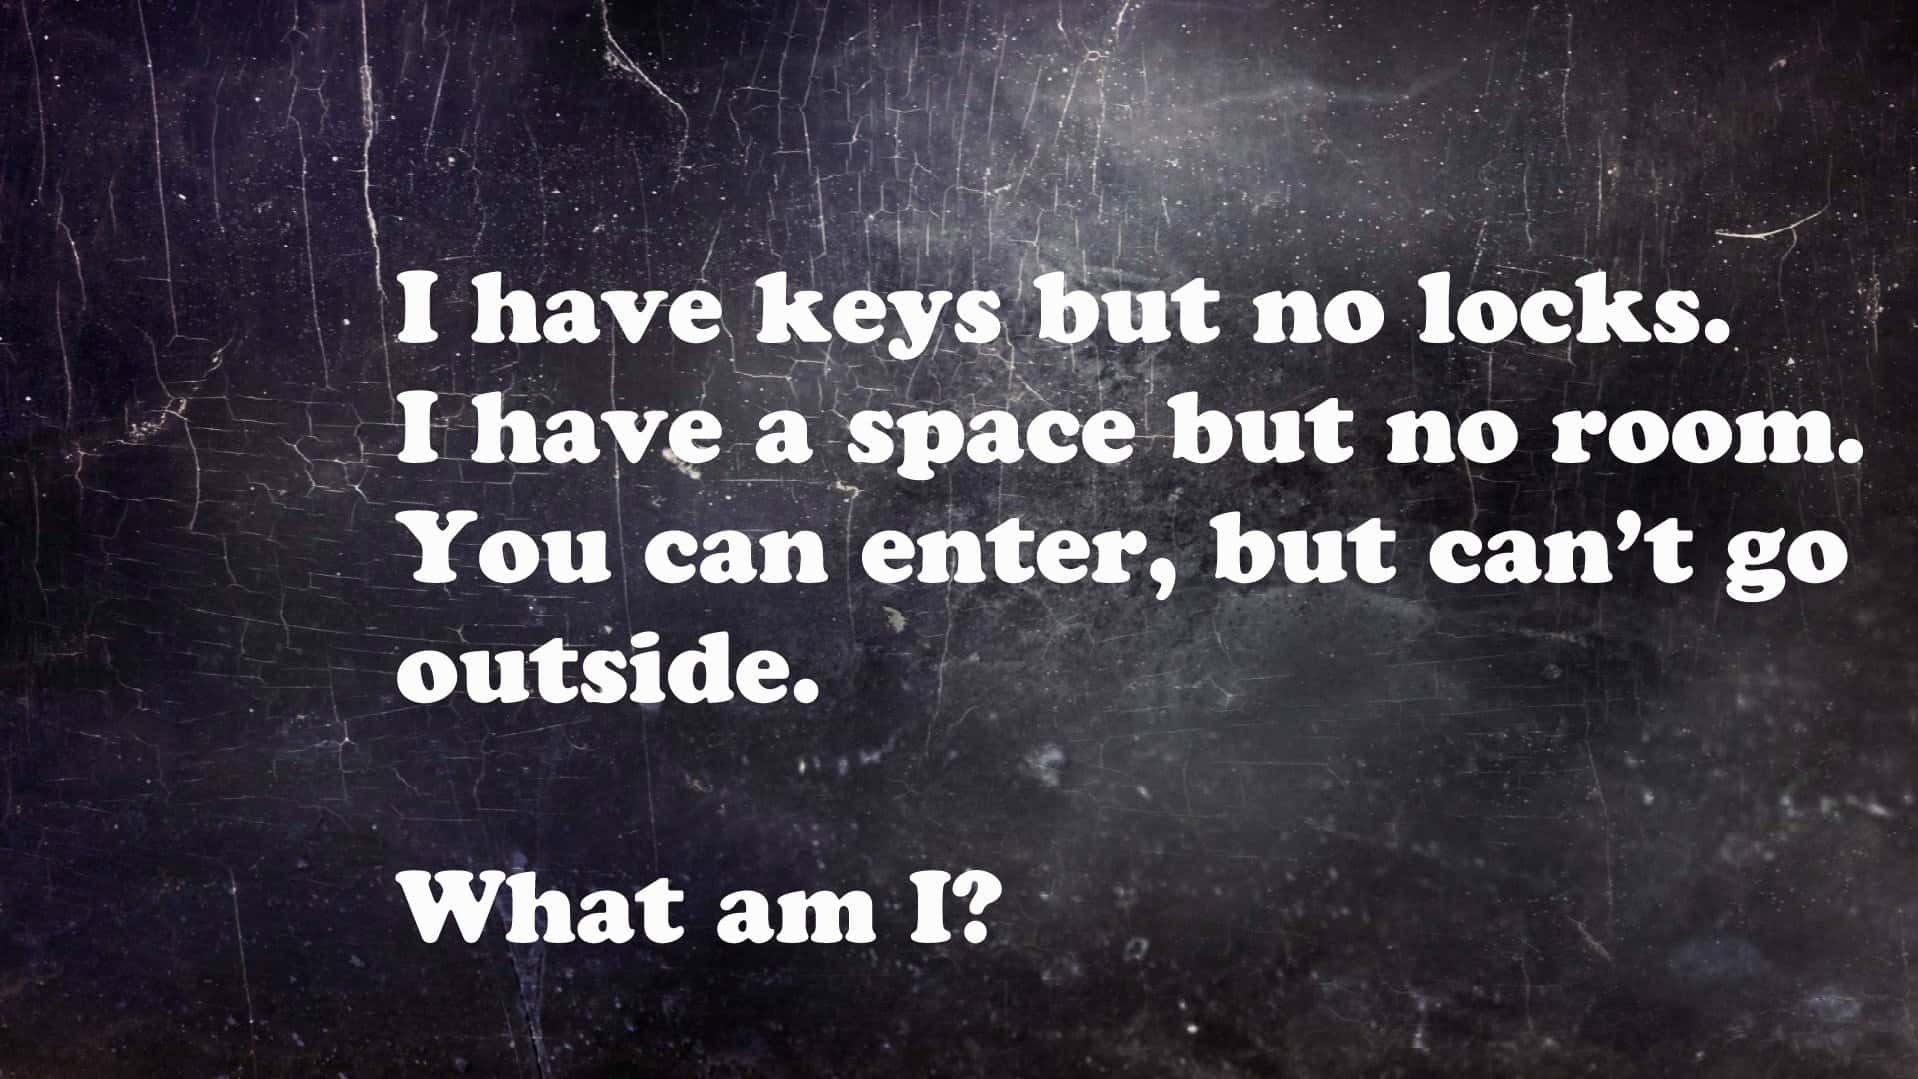 12-incredibly-difficult-riddles-that-will-drive-you-crazy-small-joys